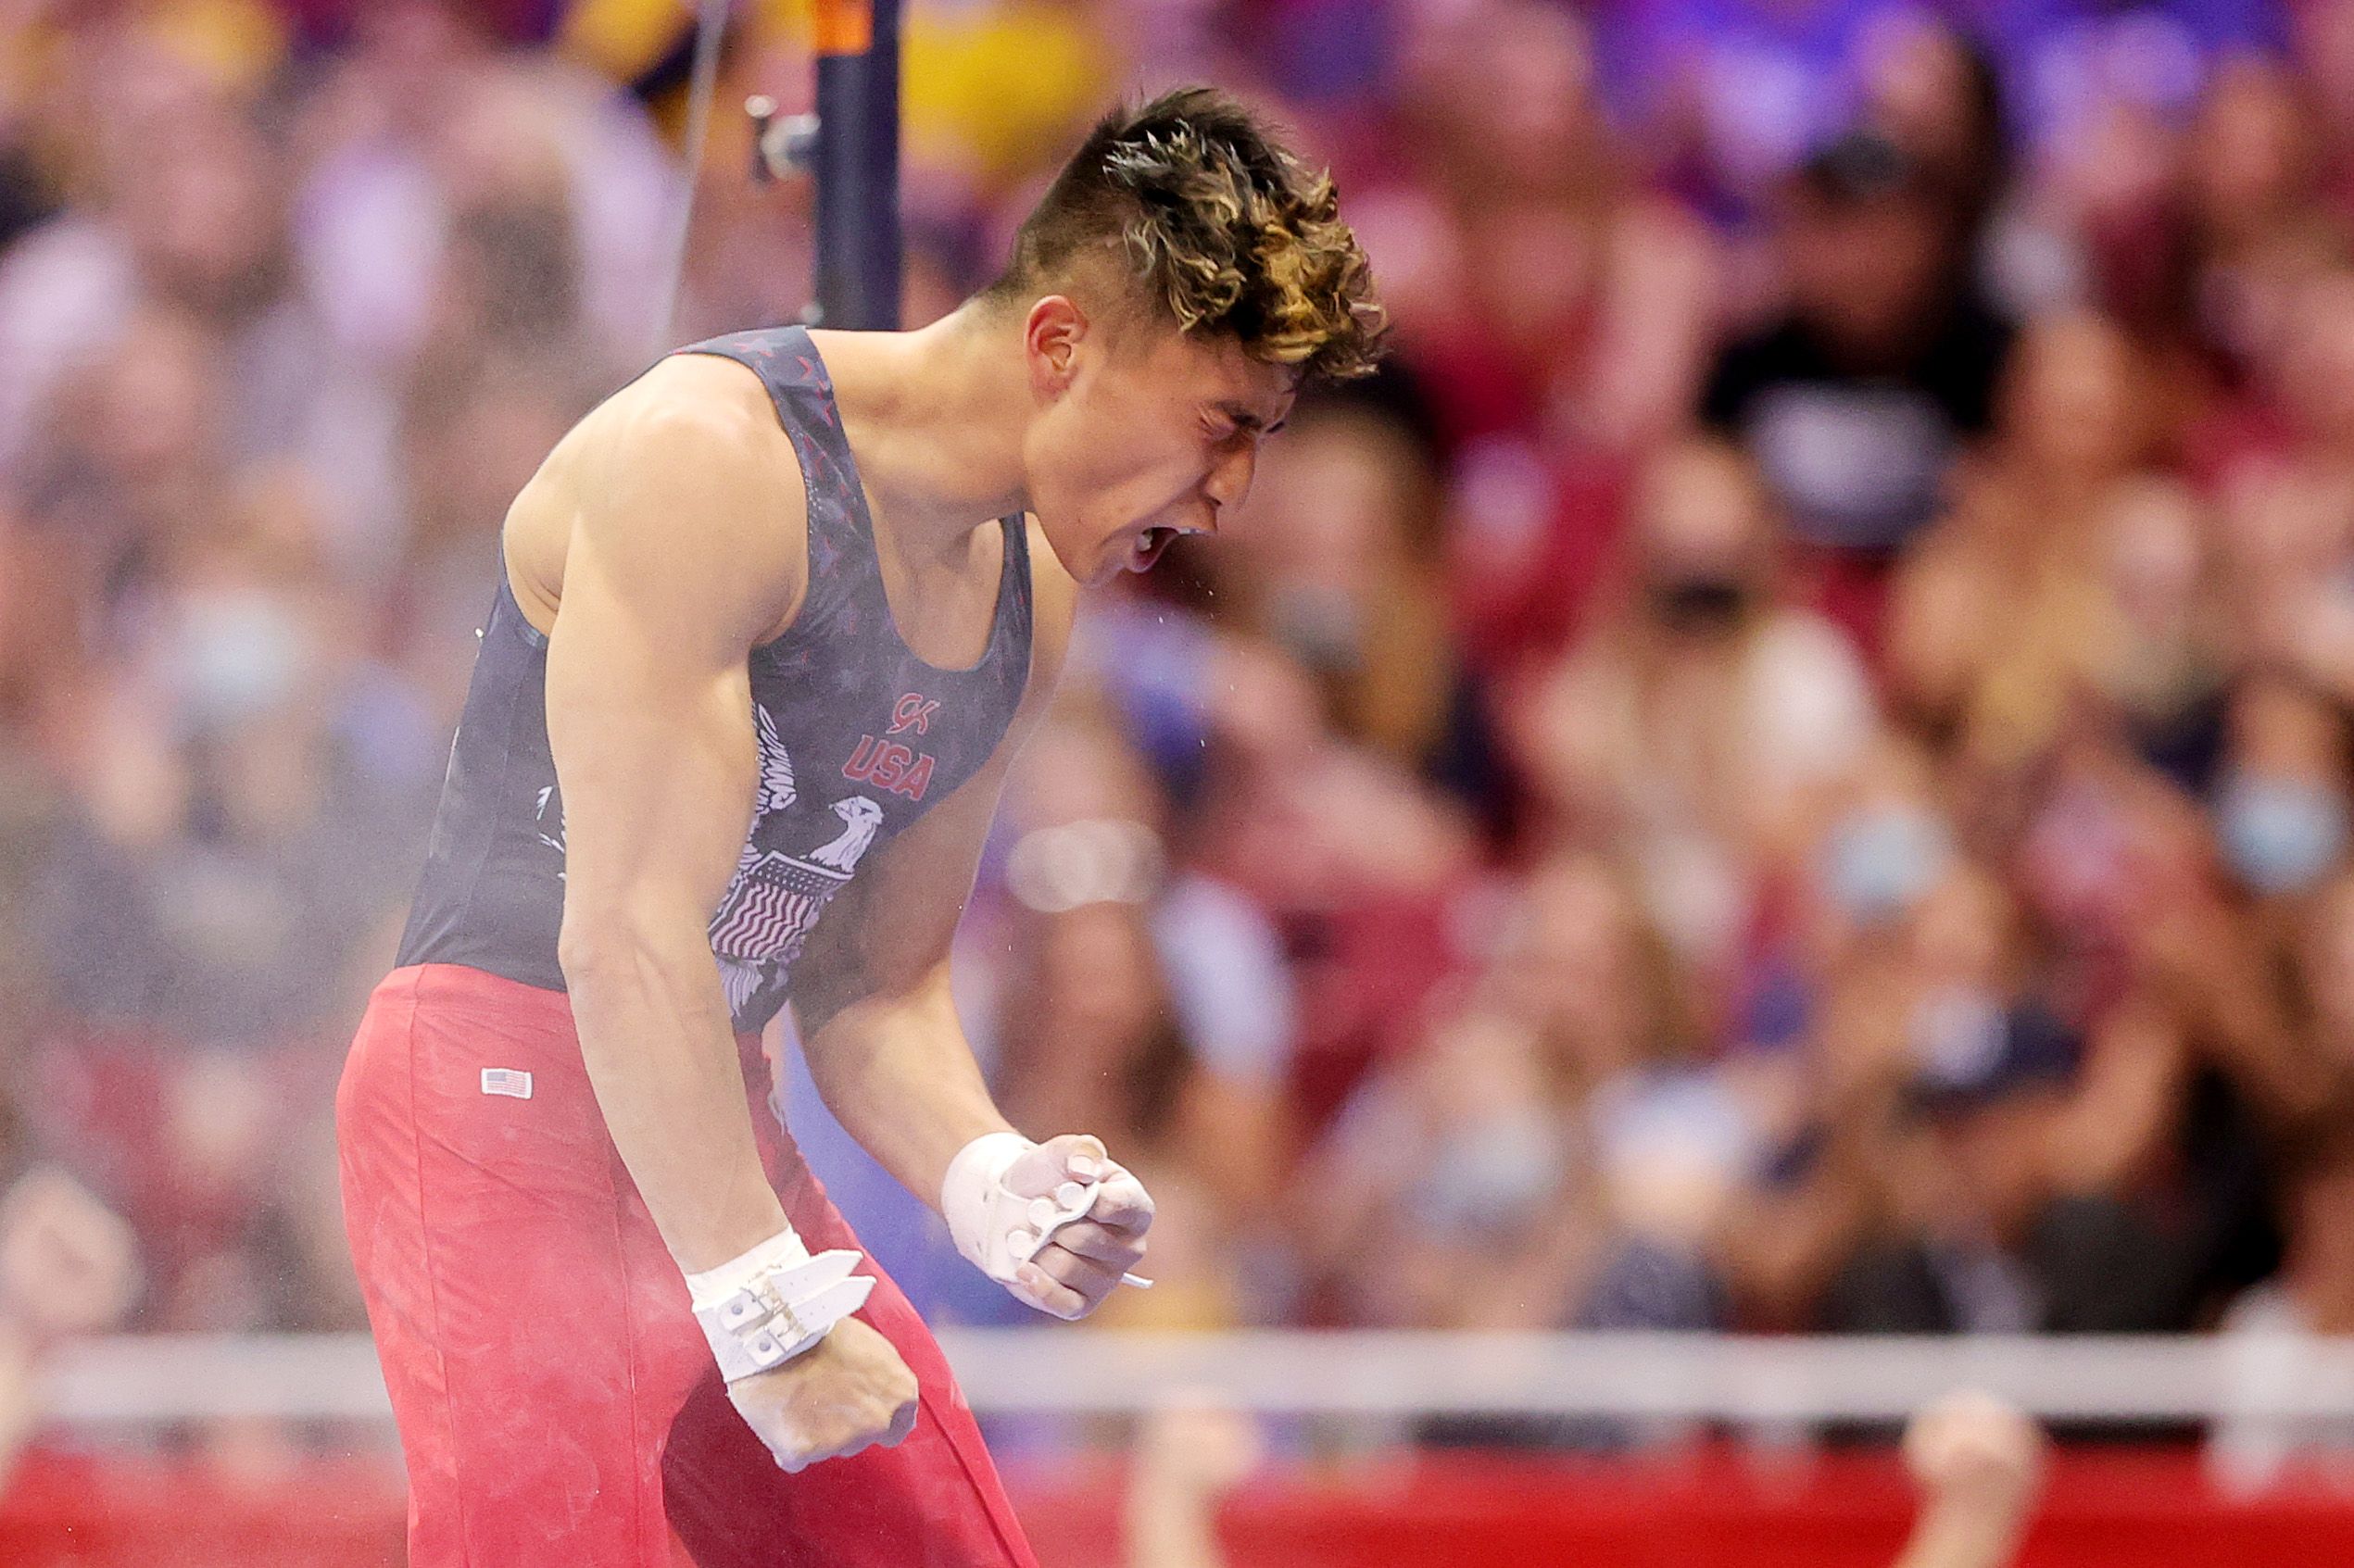 Yul Moldauer reacts after competing on high bar during the 2021 U.S. Gymnastics Olympic Trials. 